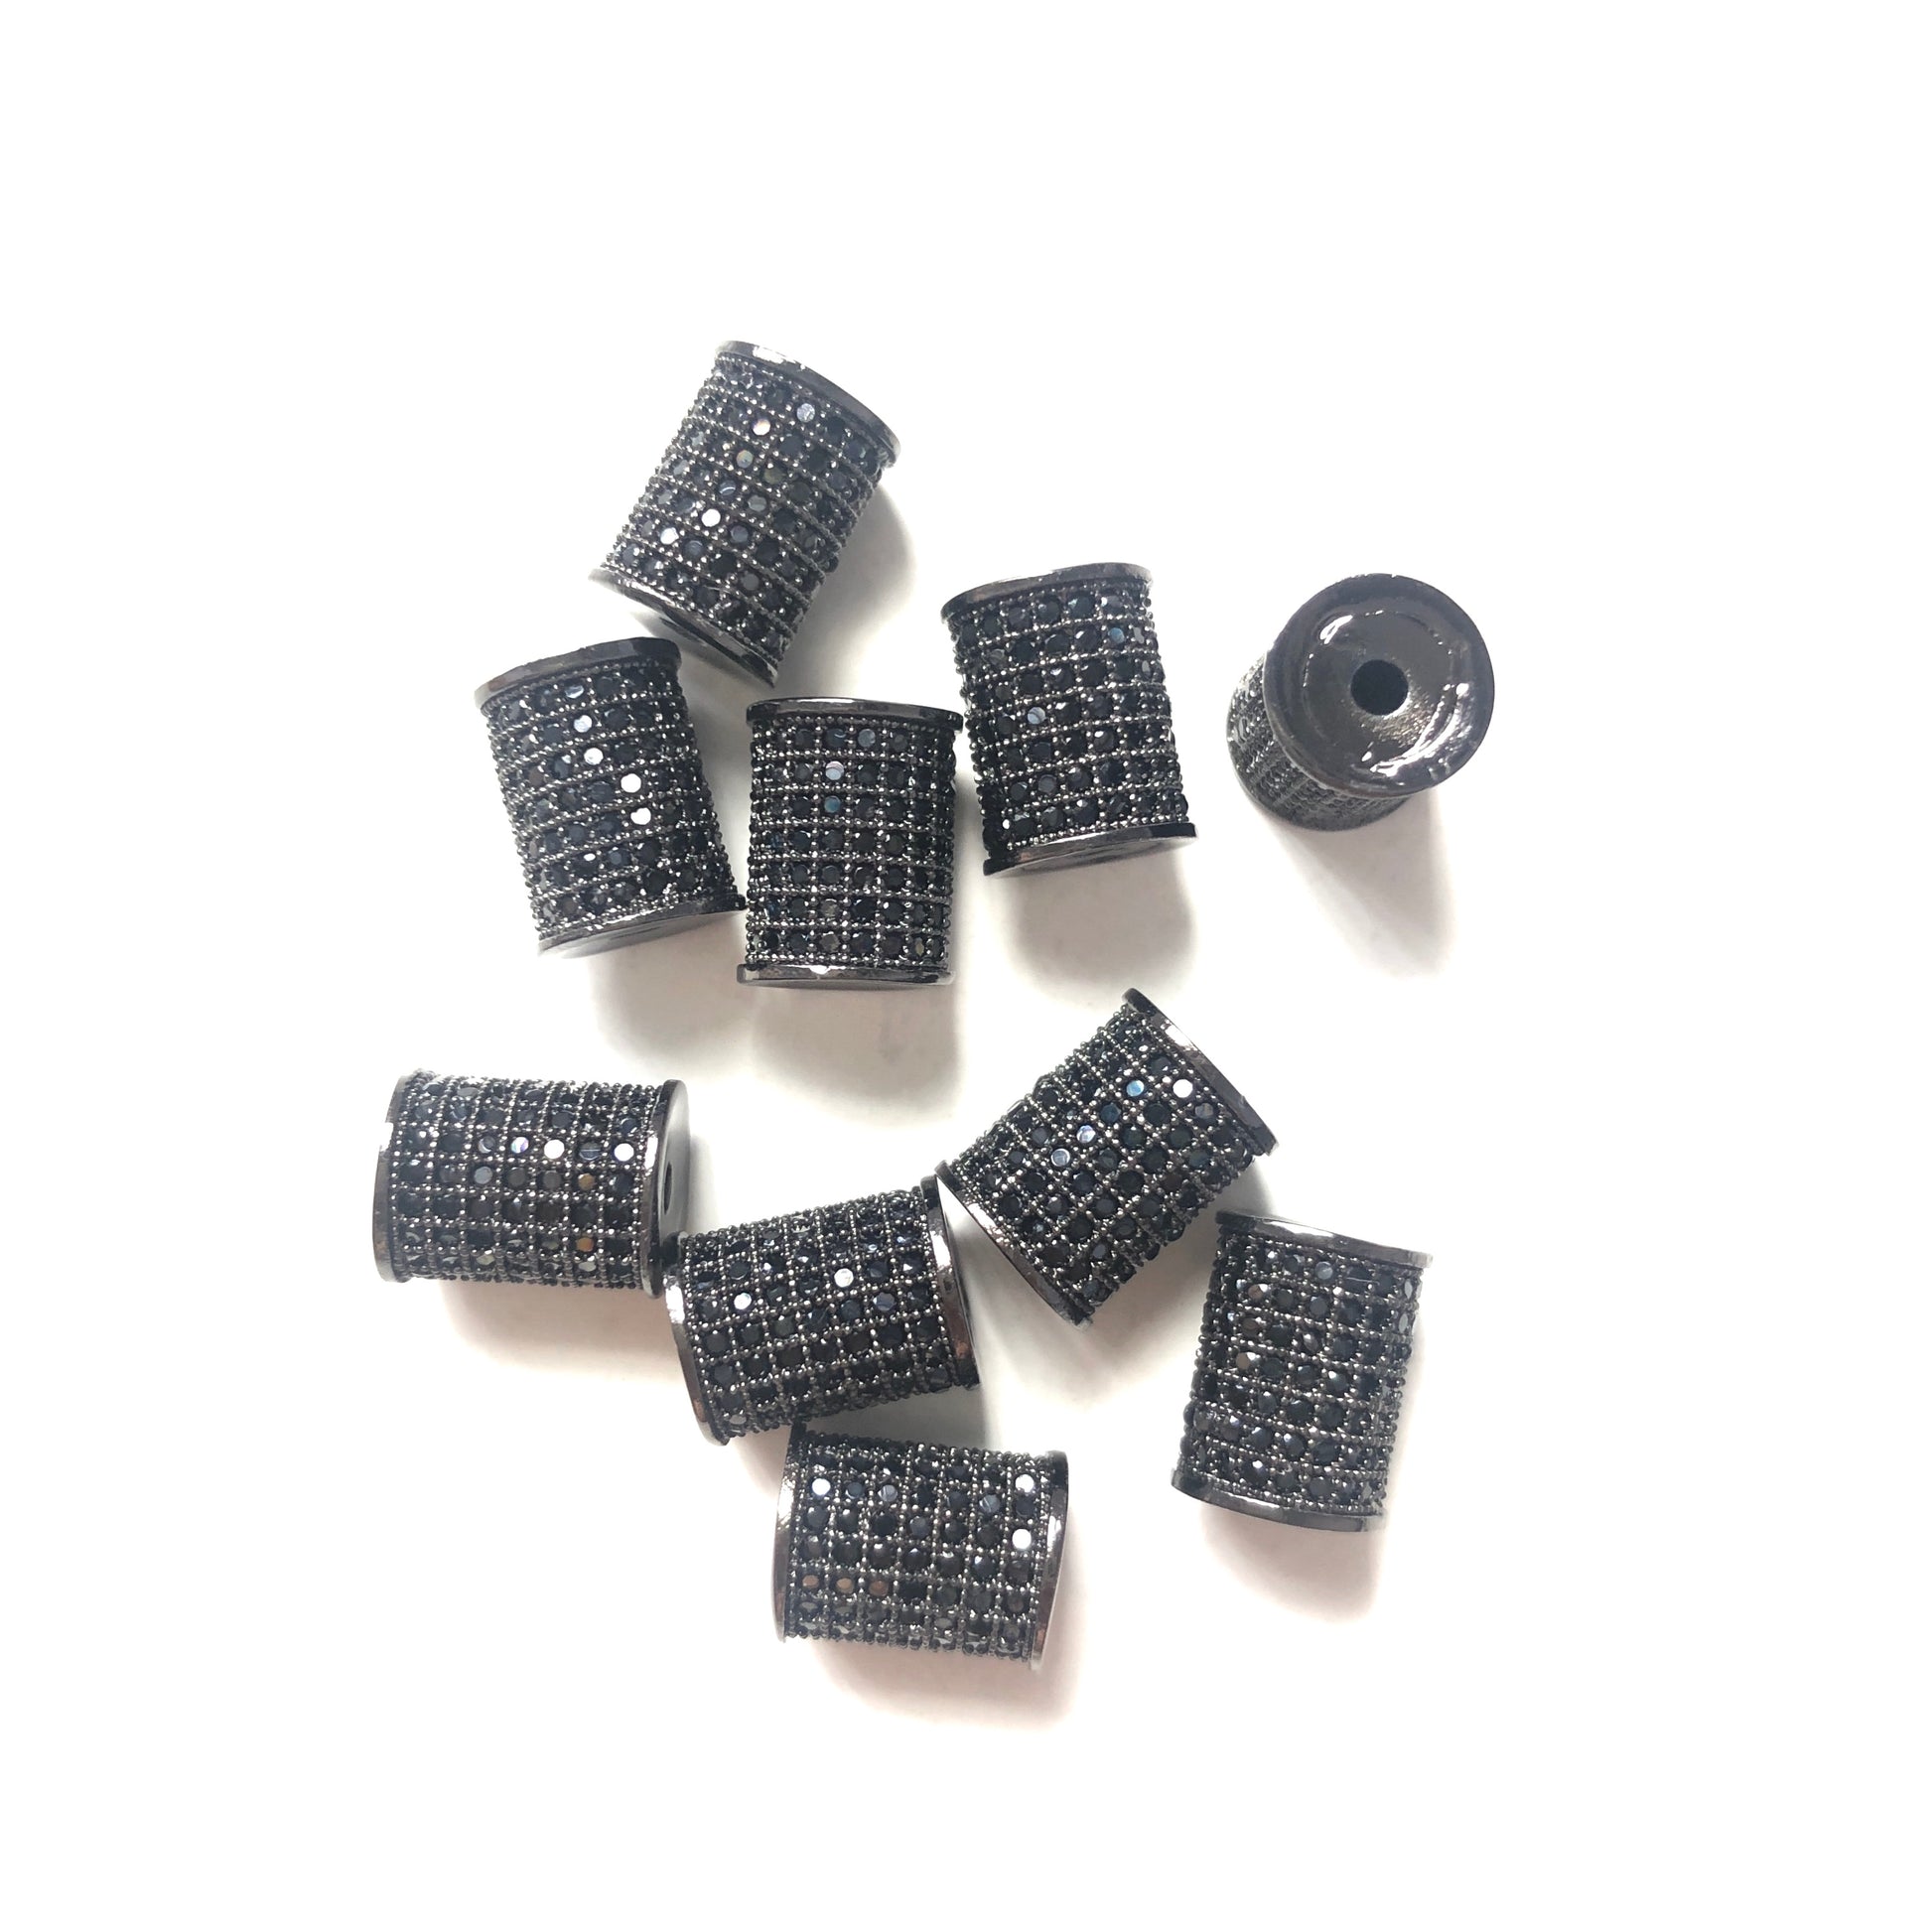 10pcs/lot 10*8mm CZ Paved Cylinder Rondelle Spacers Black on Black CZ Paved Spacers Rondelle Beads Charms Beads Beyond